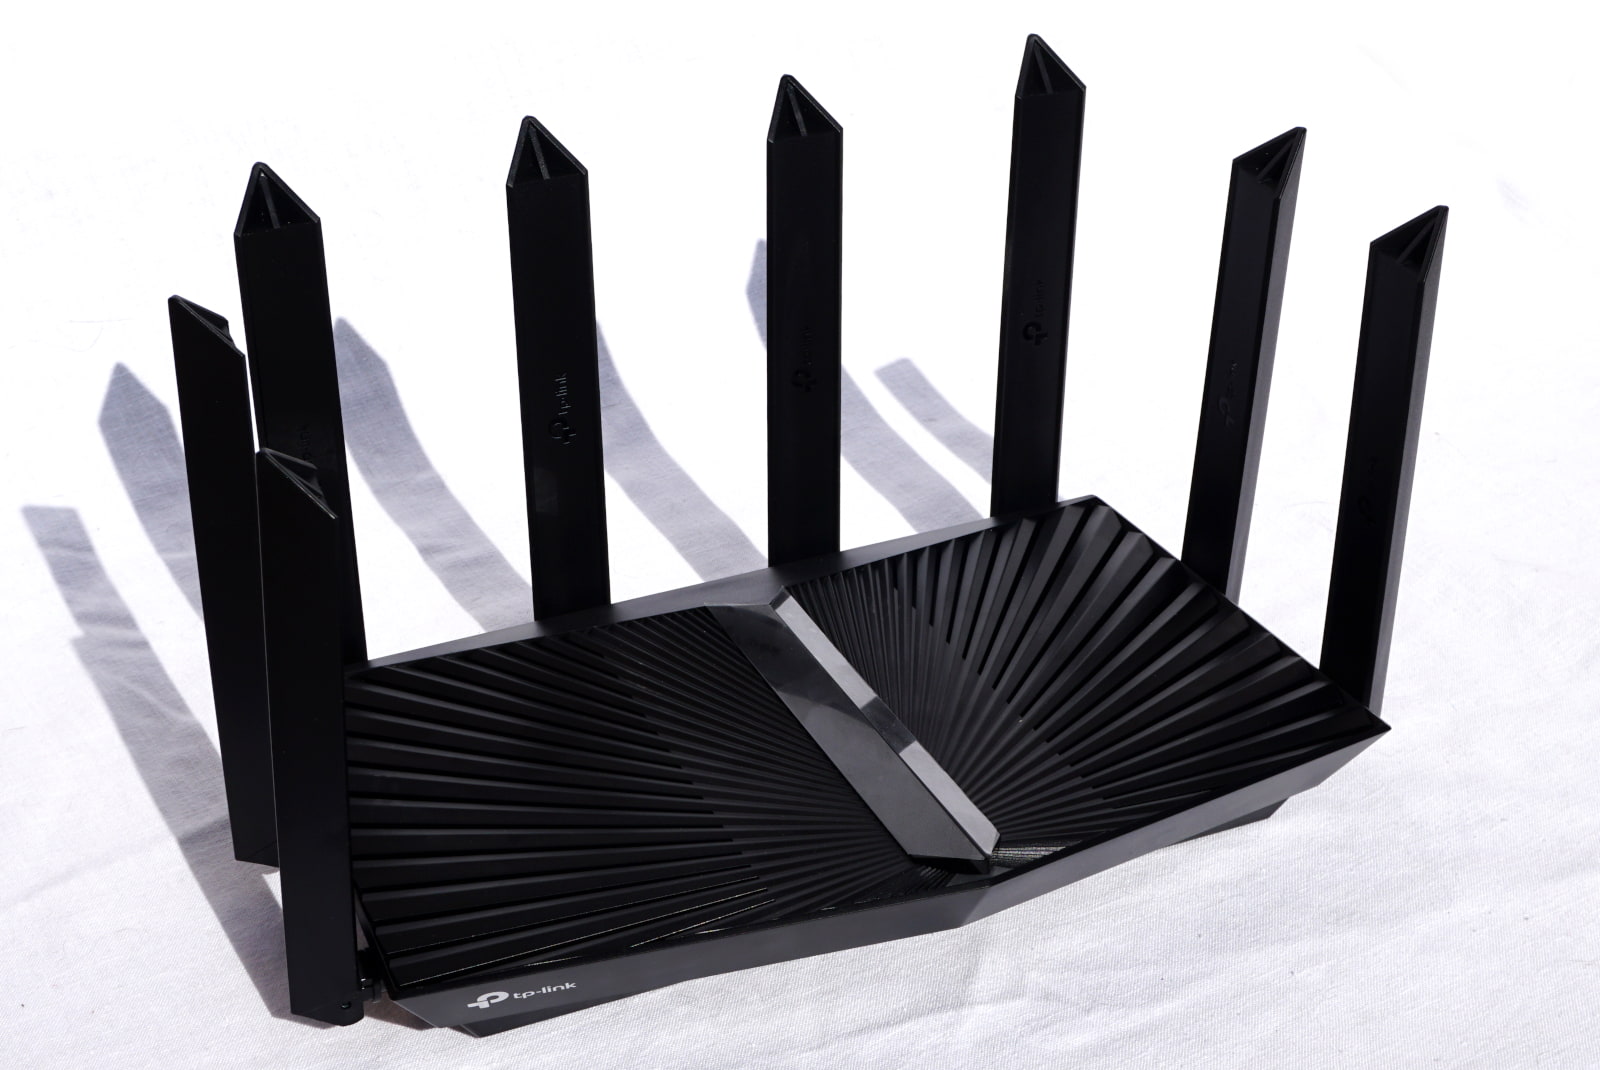 Top side view of AX90 router